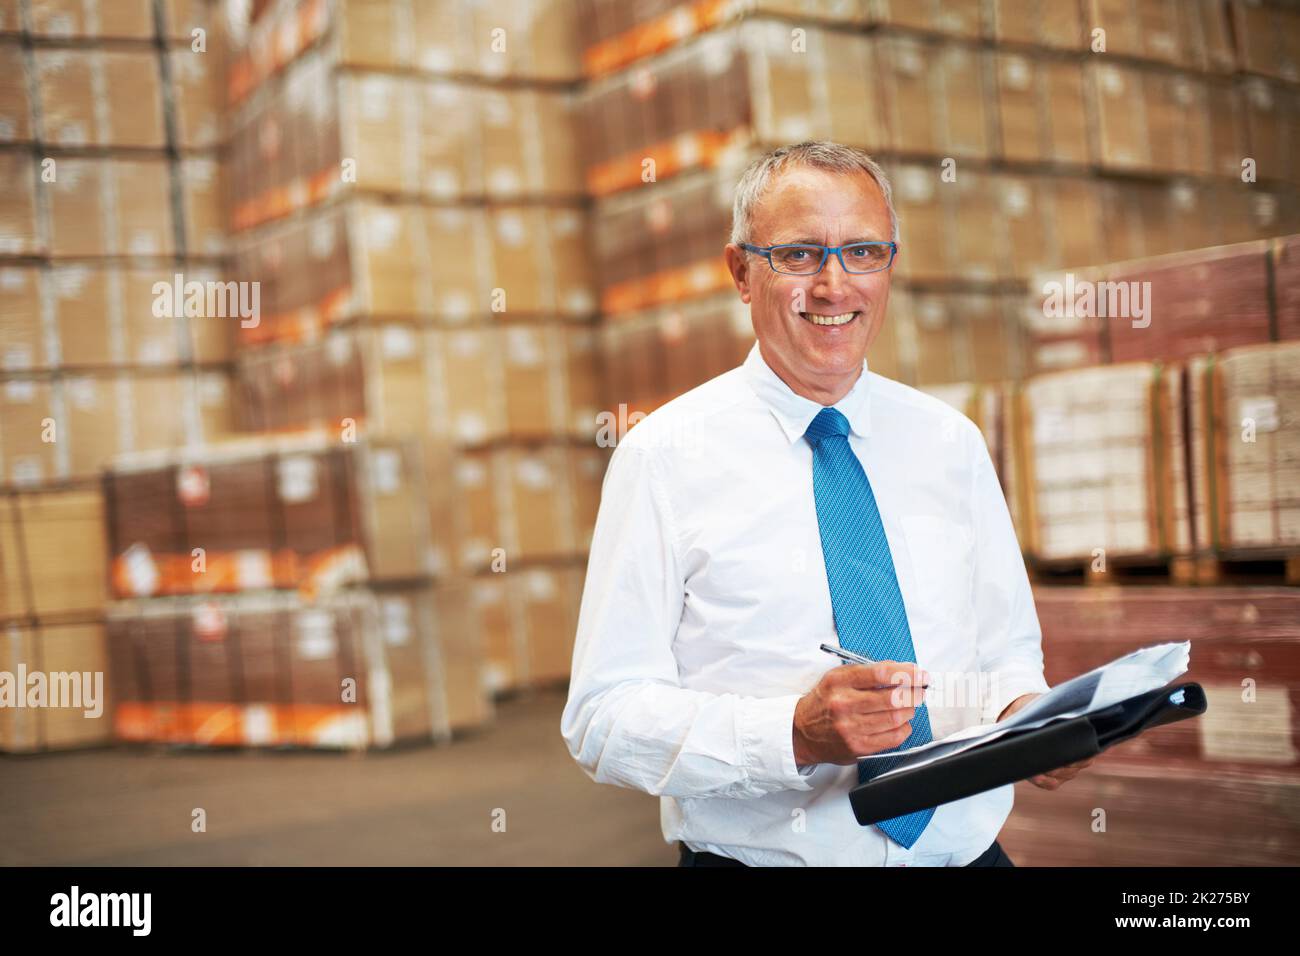 Success is grasping opportunities. A storage warehouse manager standing in the factor amidst many boxes. Stock Photo